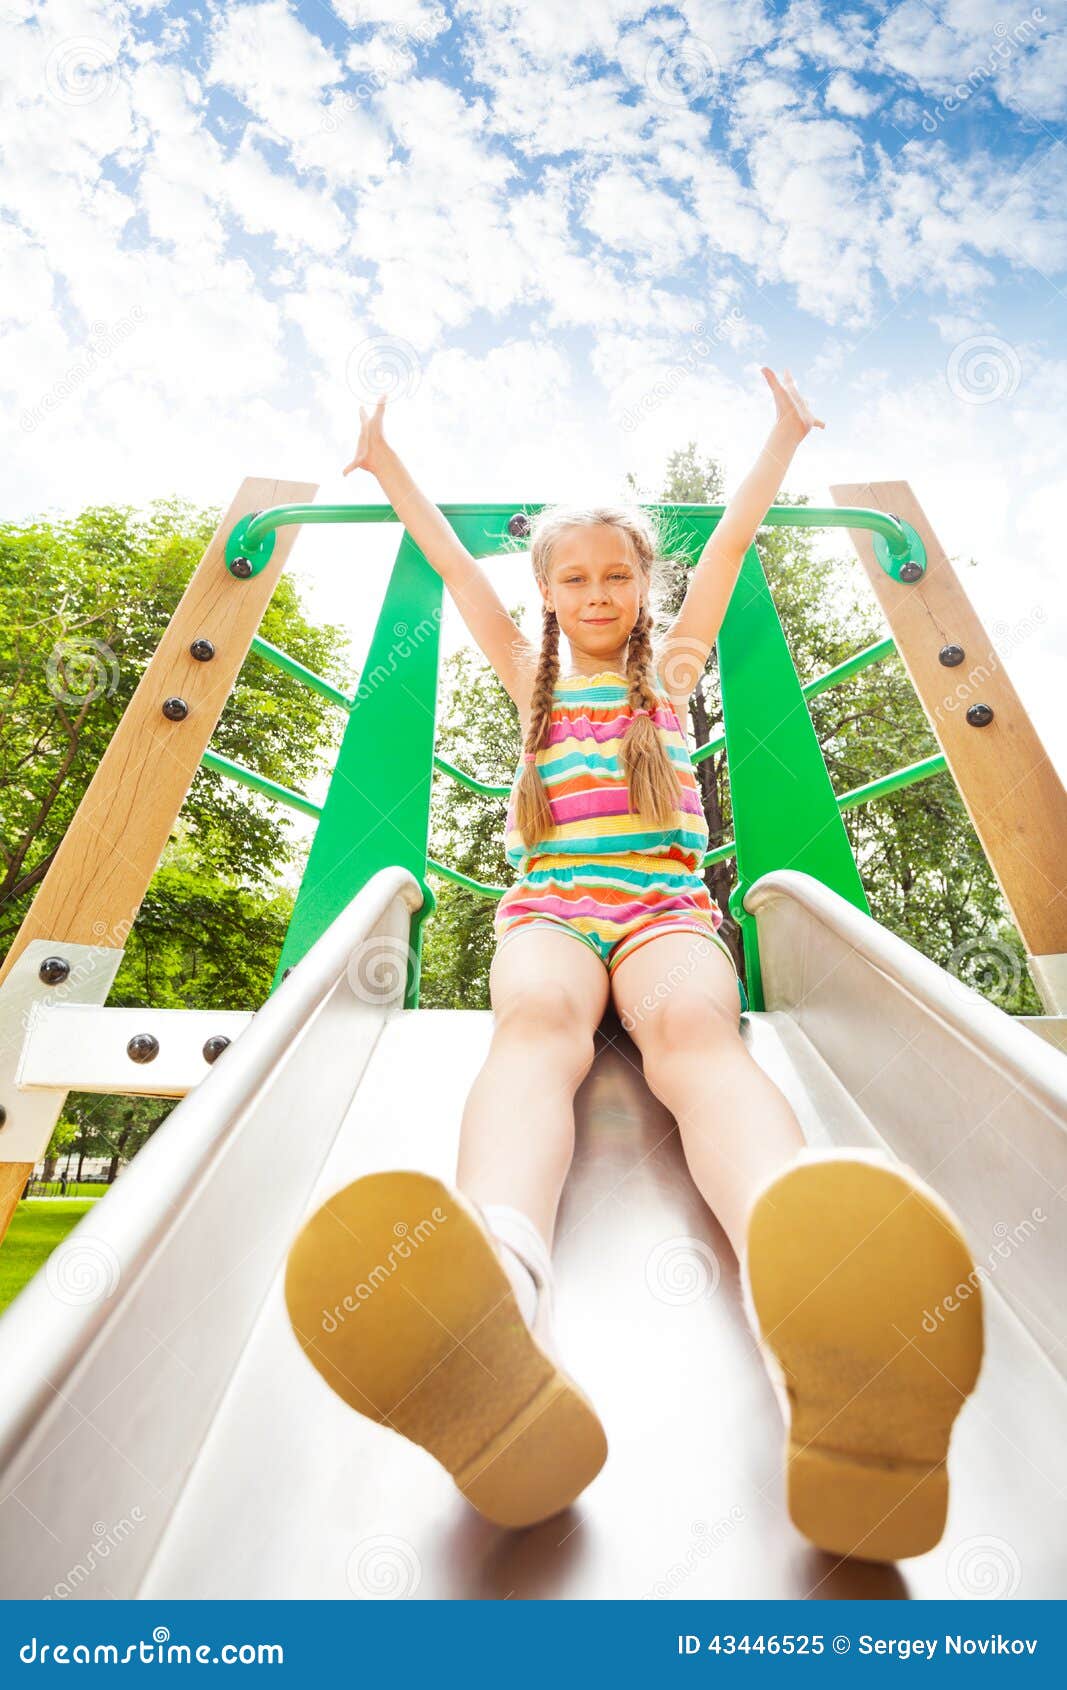 girl with hands up sits on playground chute